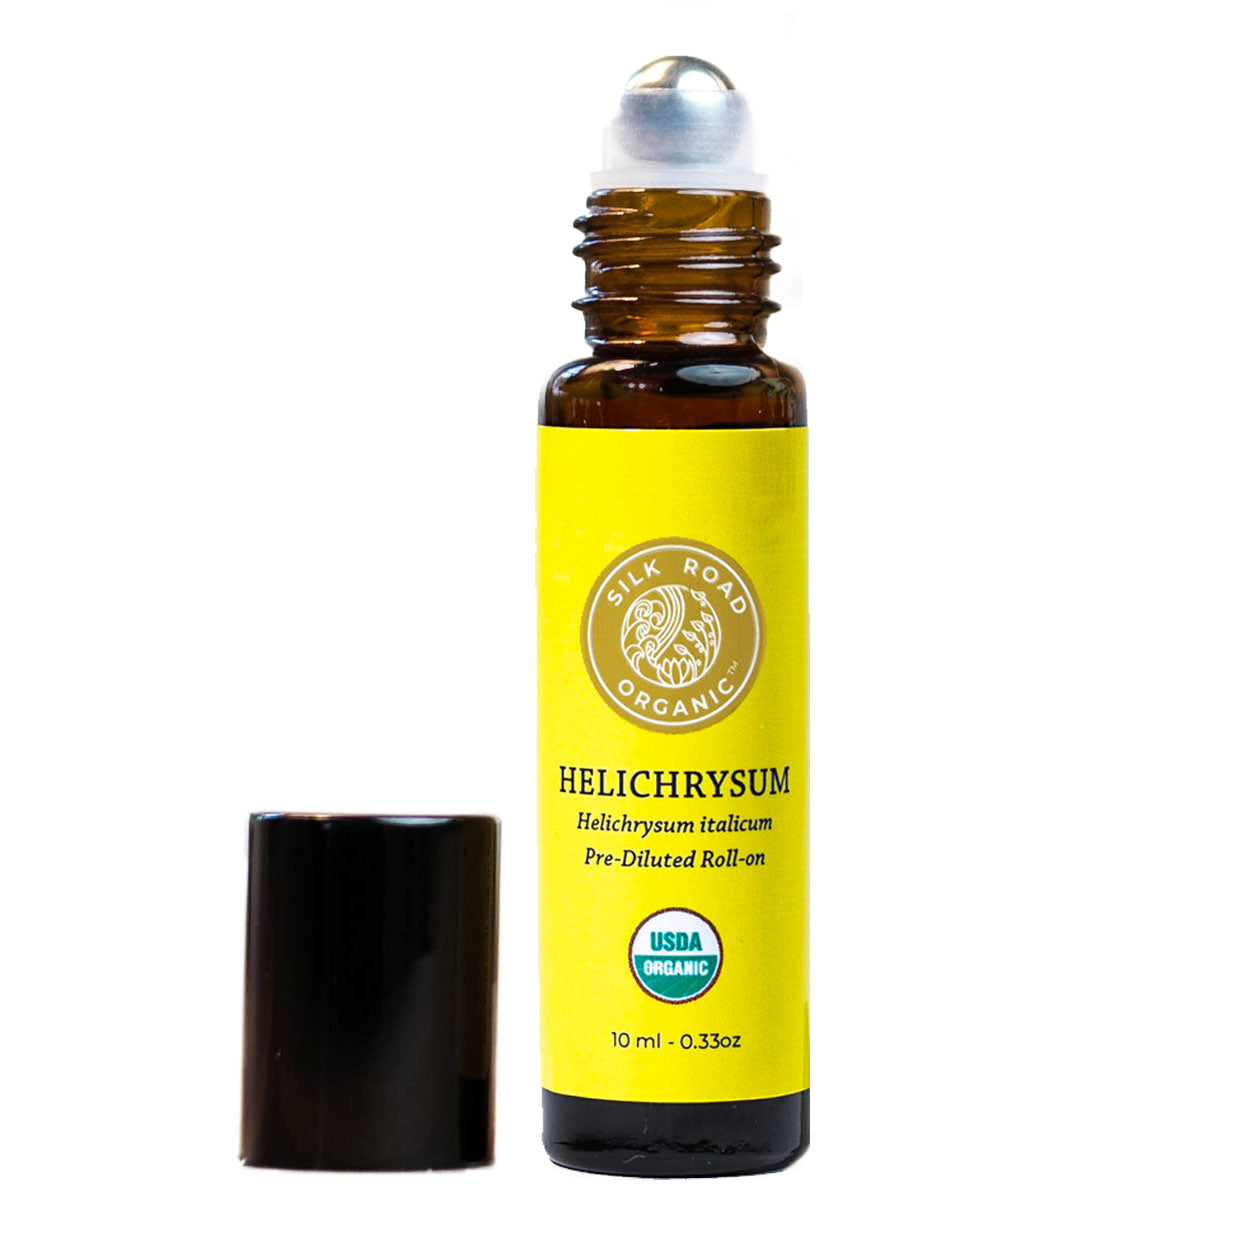 helichrysum essential oil anti-aging skincare face smooth fine lines wrinkles silk road organic